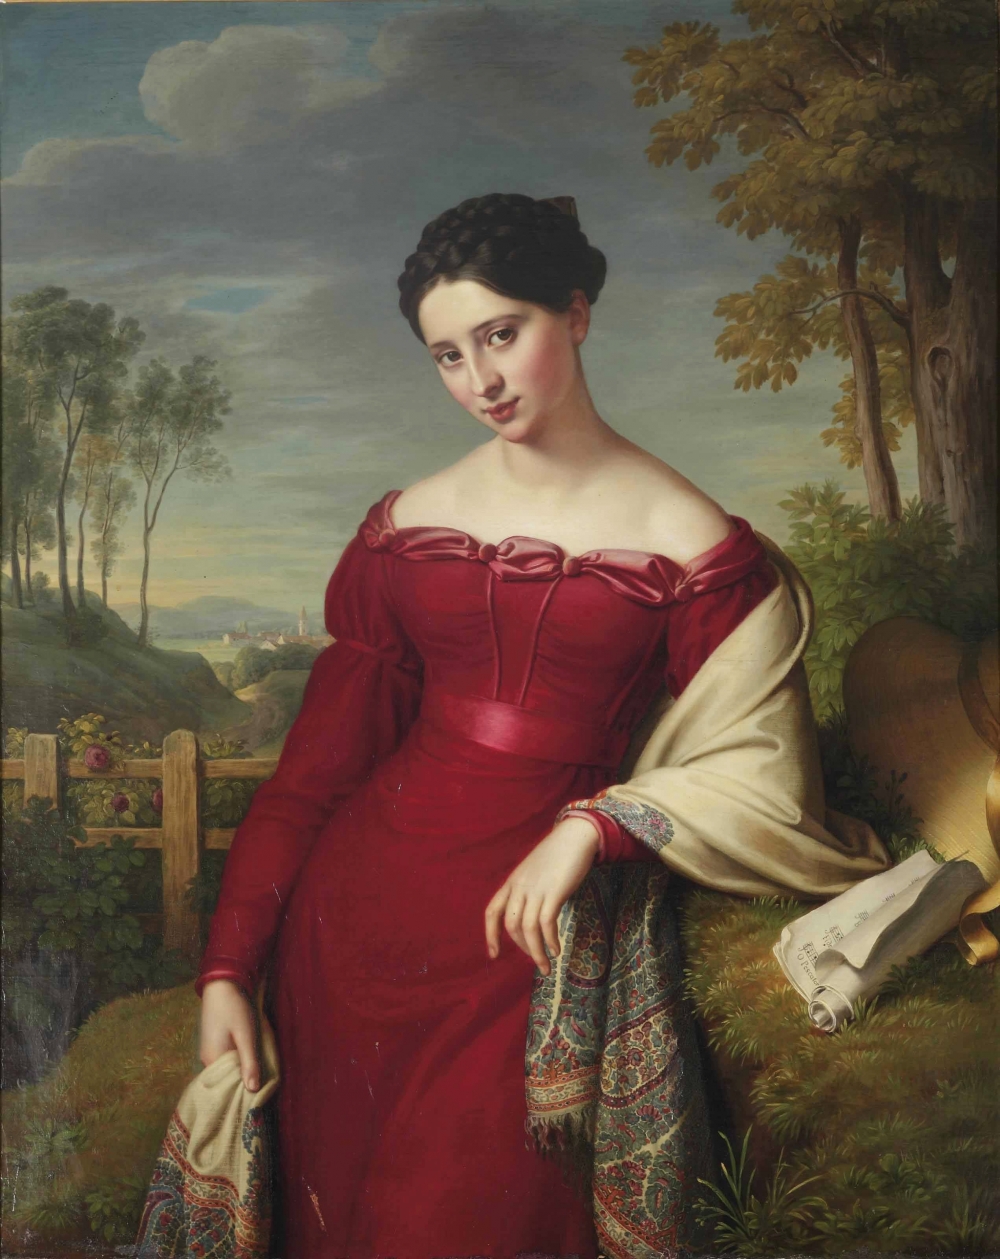 1824 portrait of a lady with an embroidered paisley shawl, Eduard Friedrich Leybold, Courtesy: Wikimedia Commons